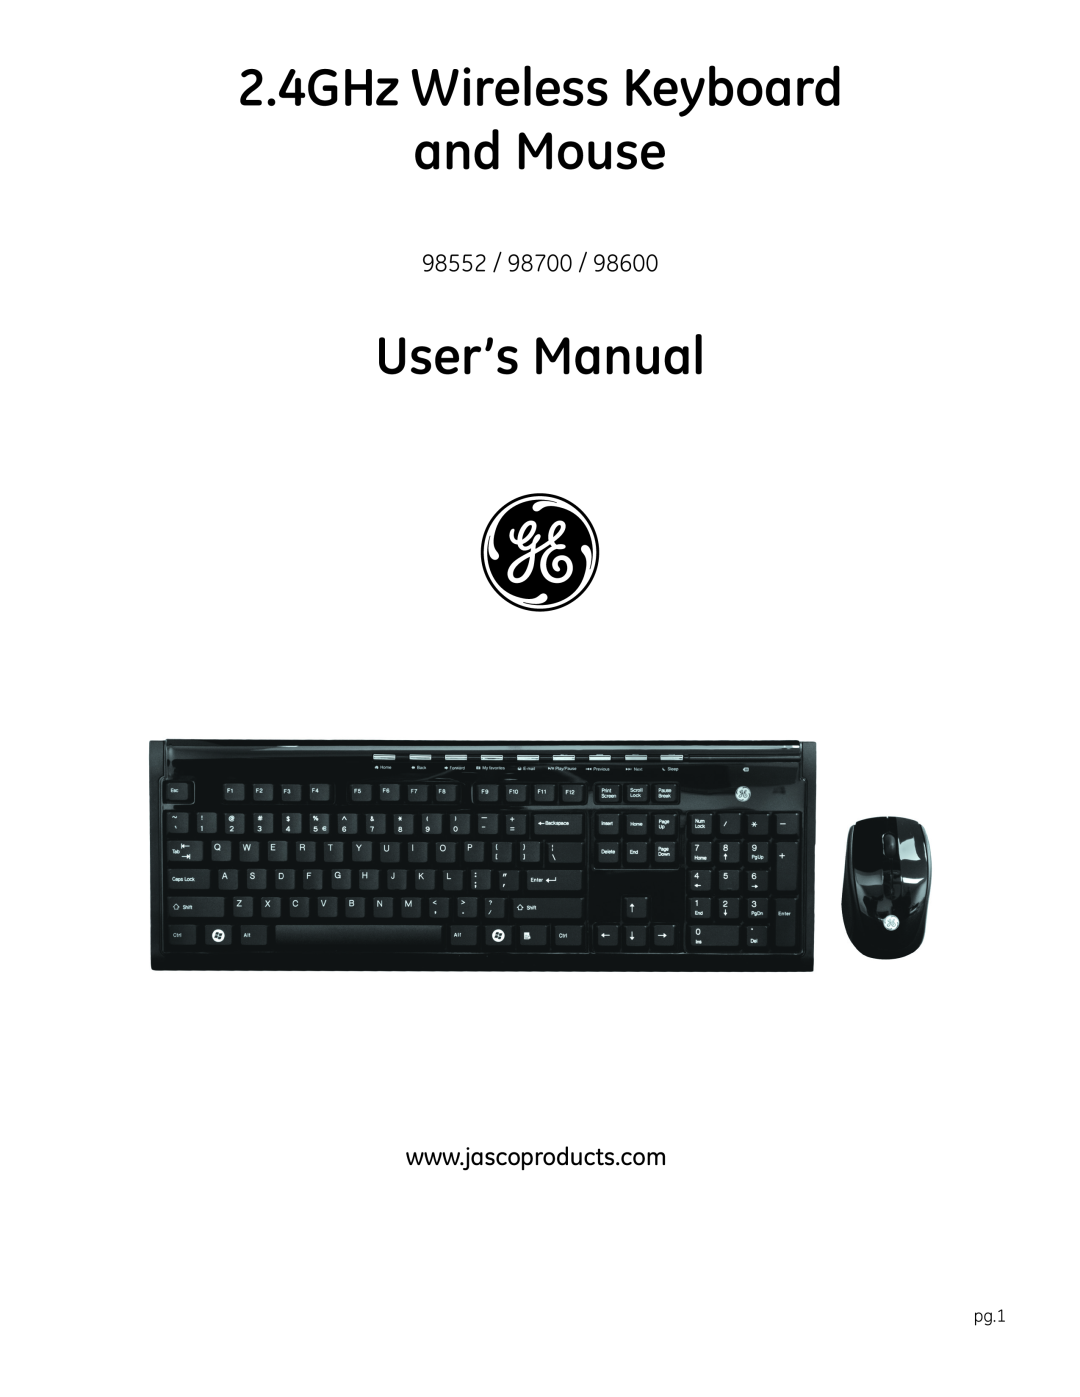 Jasco 98600 user manual 2.4GHz Wireless Keyboard and Mouse, User’s Manual, 98552 / 98700, pg.1 